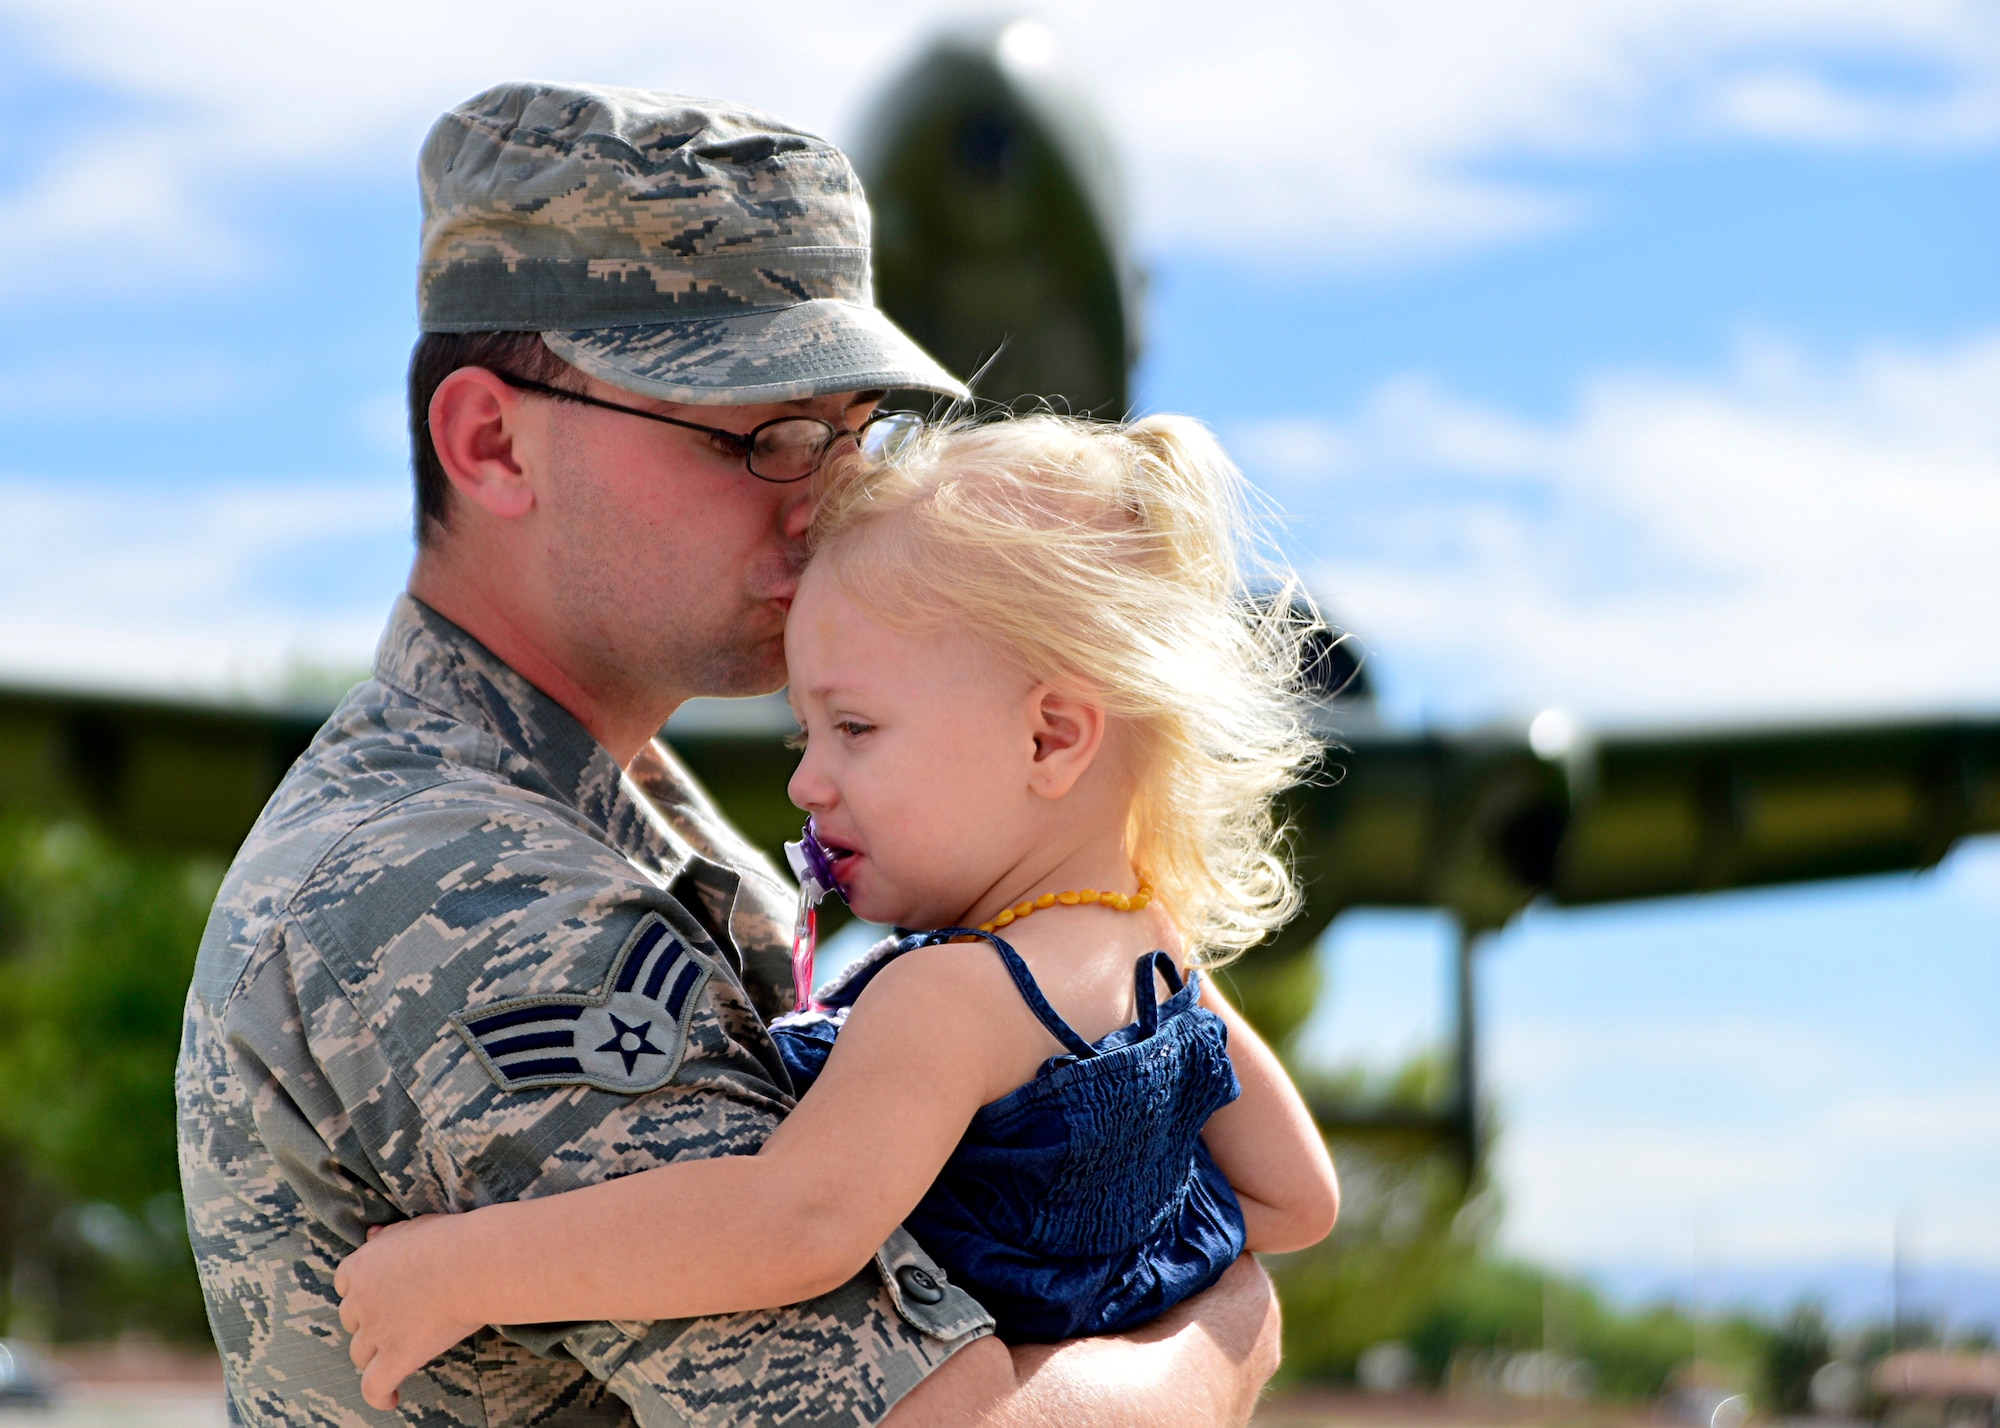 Senior Airman Christian Clauson, a 432nd Wing/432nd Air Expeditionary Wing photojournalist, kisses his daughter, Francesca, 2, at Nellis Air Force Base, Nev., June 9, 2016. Christian, who grew up as a military child, reflects on his transition from military child to military father. (U.S. Air Force photo/Tech. Sgt. Nadine Barclay)